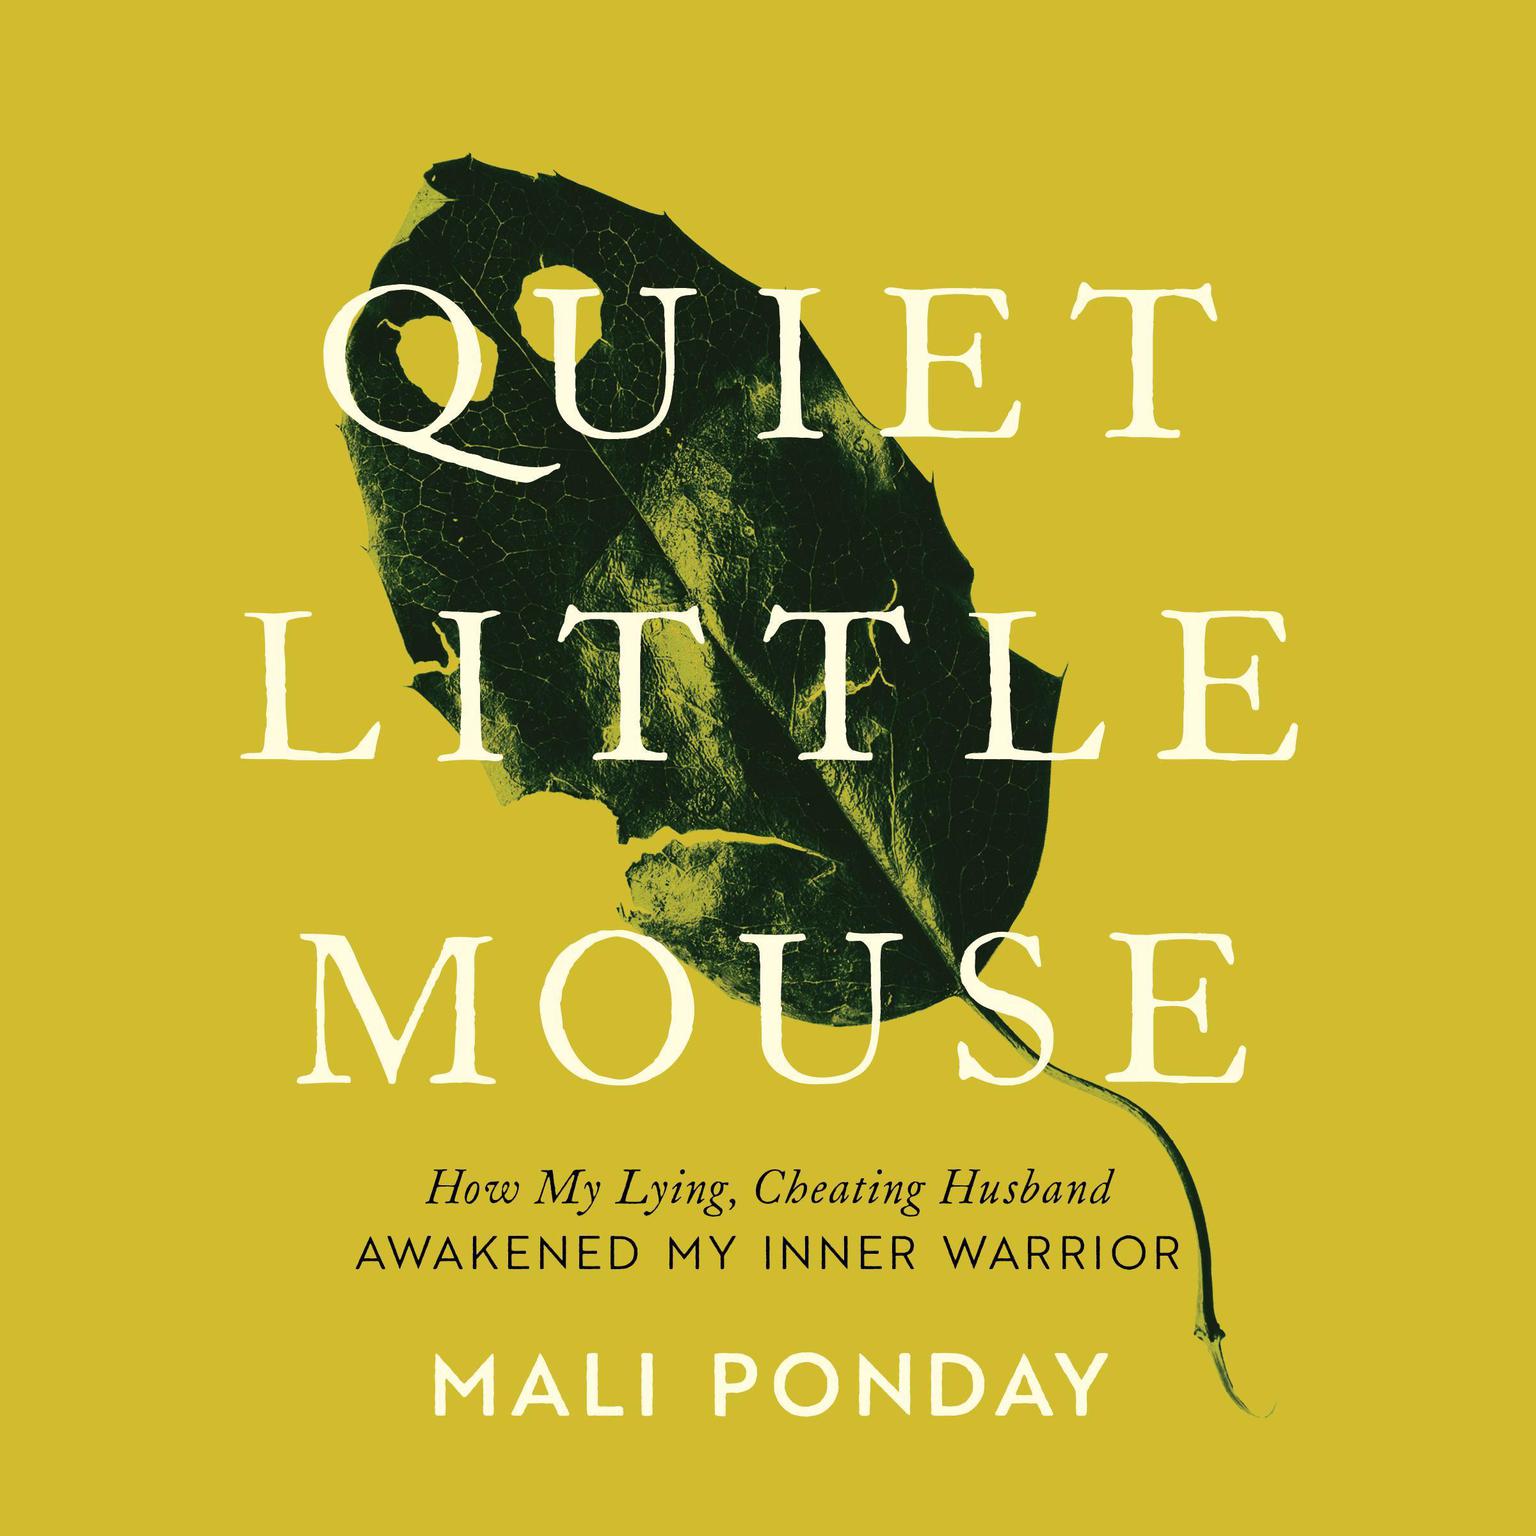 Quiet Little Mouse: How My Lying, Cheating Husband Awakened My Inner Warrior Audiobook, by Mali Ponday